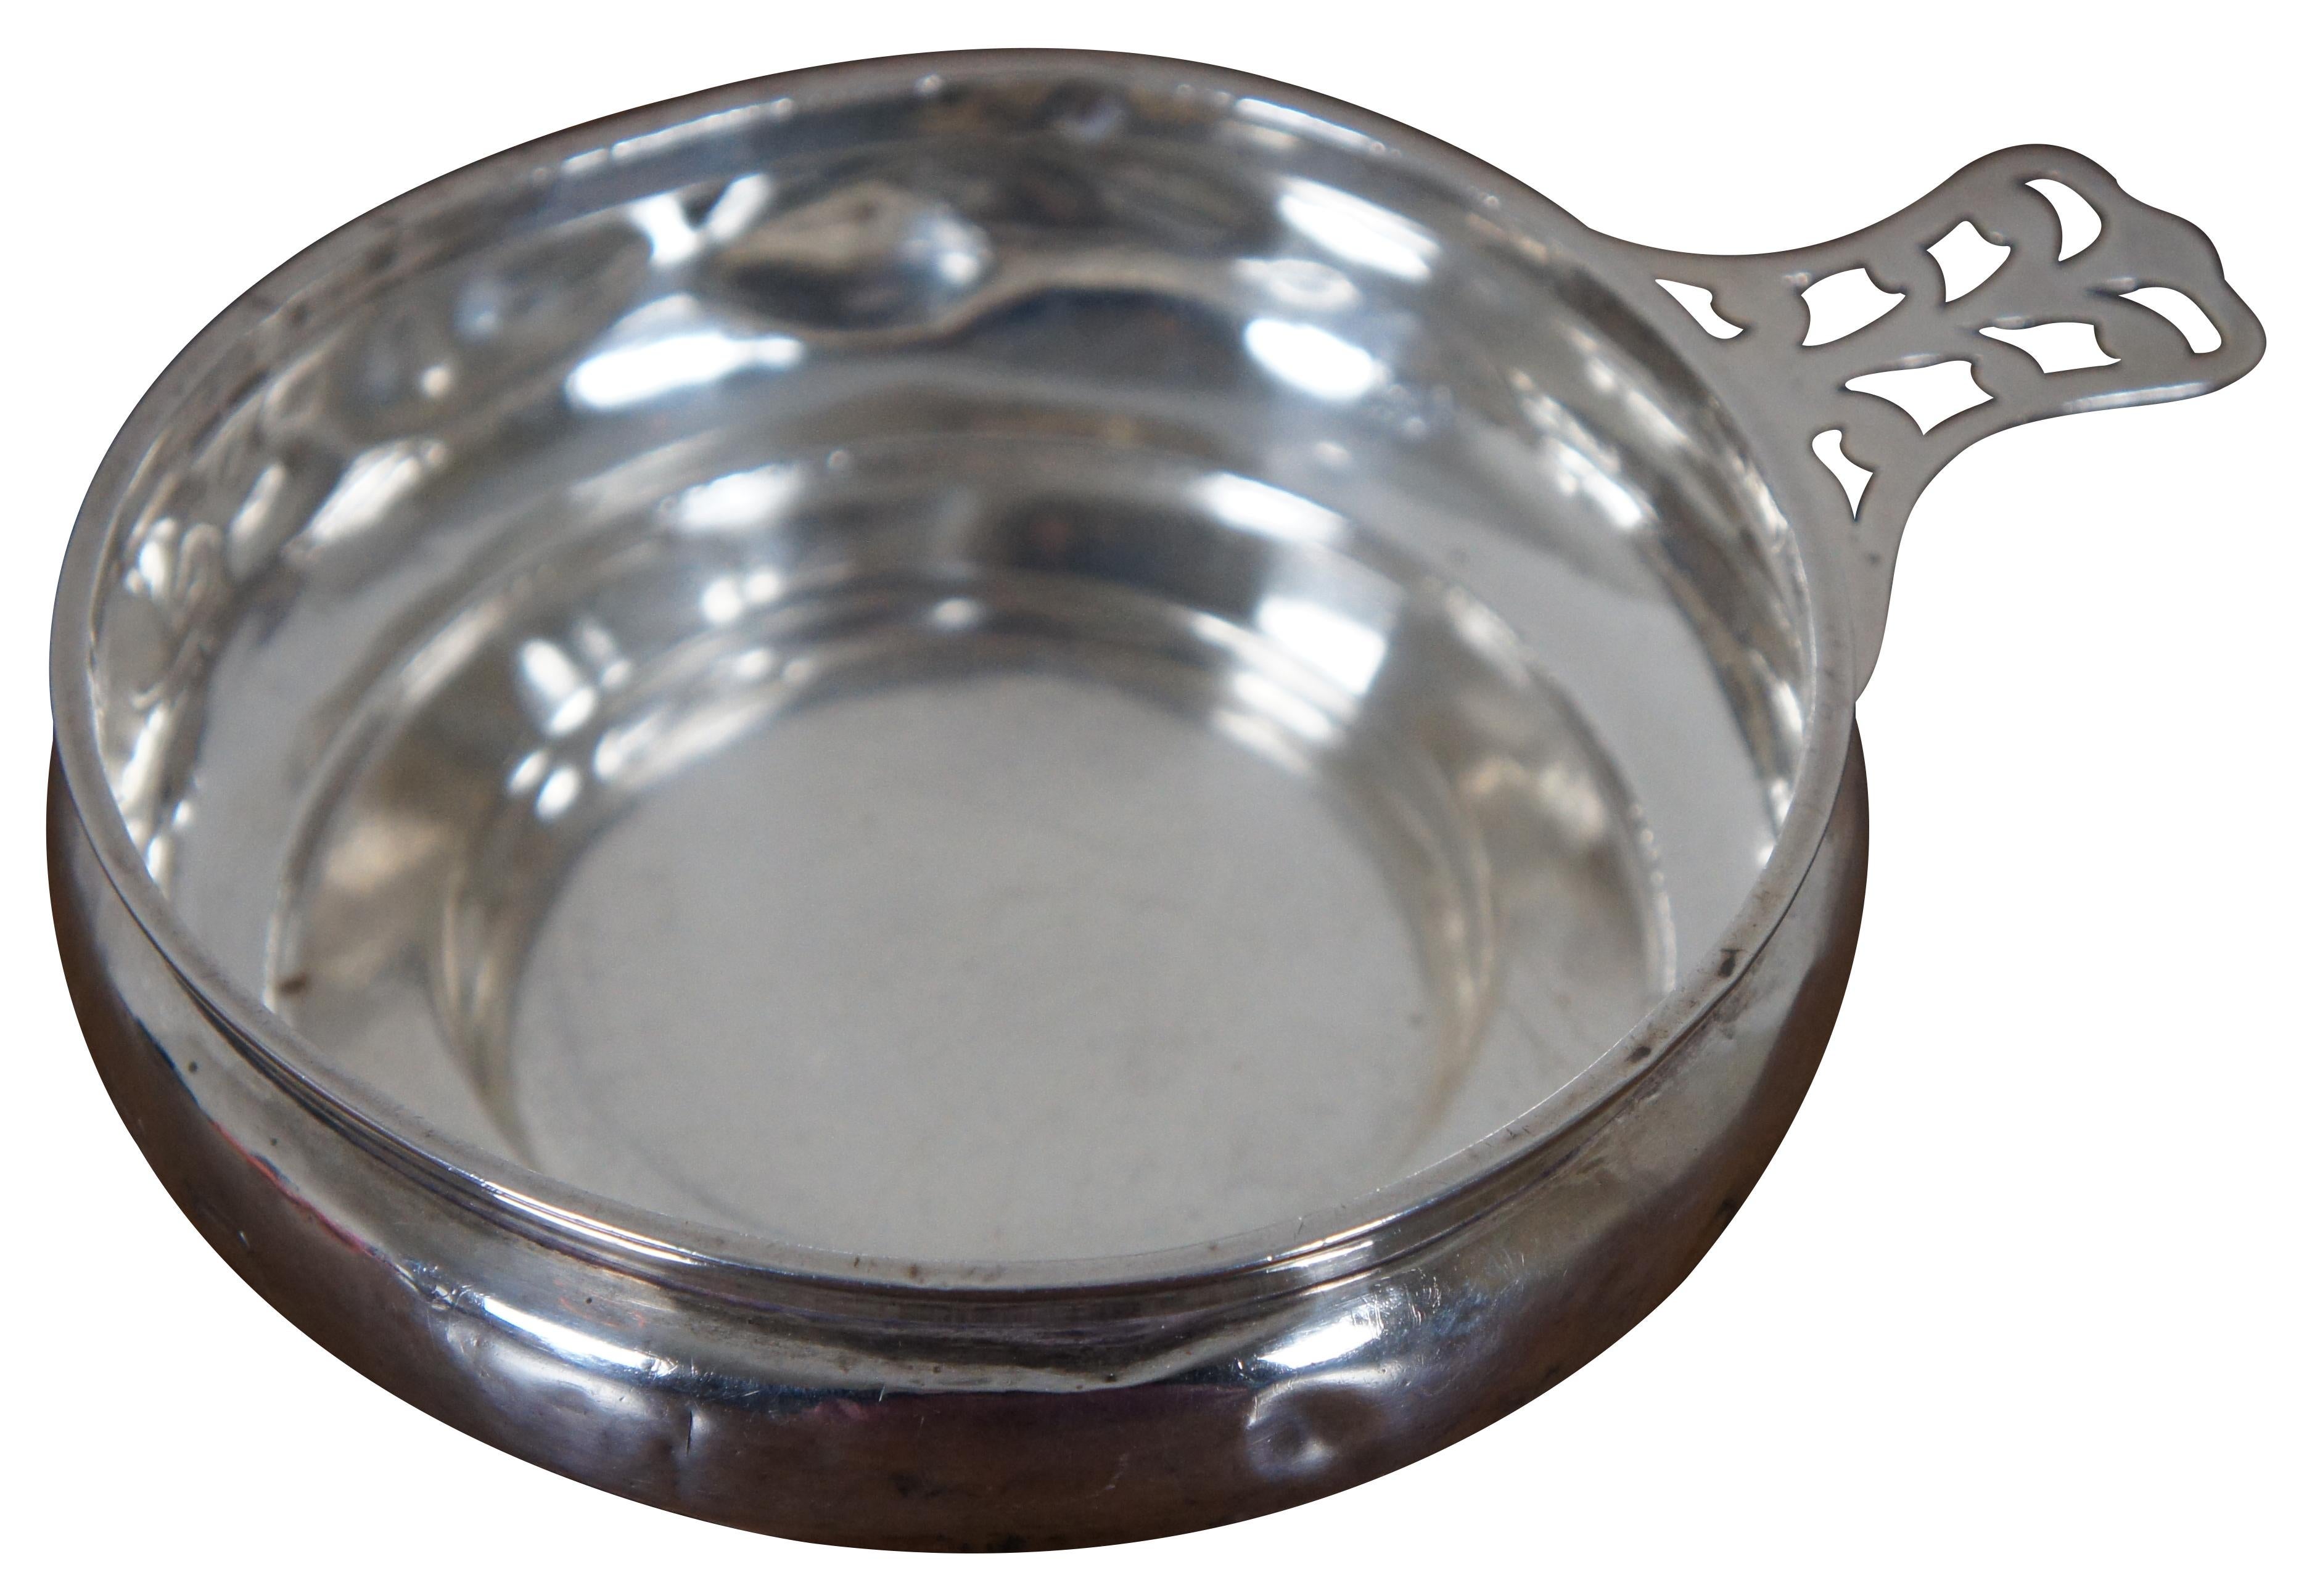 Vintage Elgin American Manufacturing sterling silver 925 number 2066 porringer bowl with pierced handle. Engraved with the initials JDSG.

